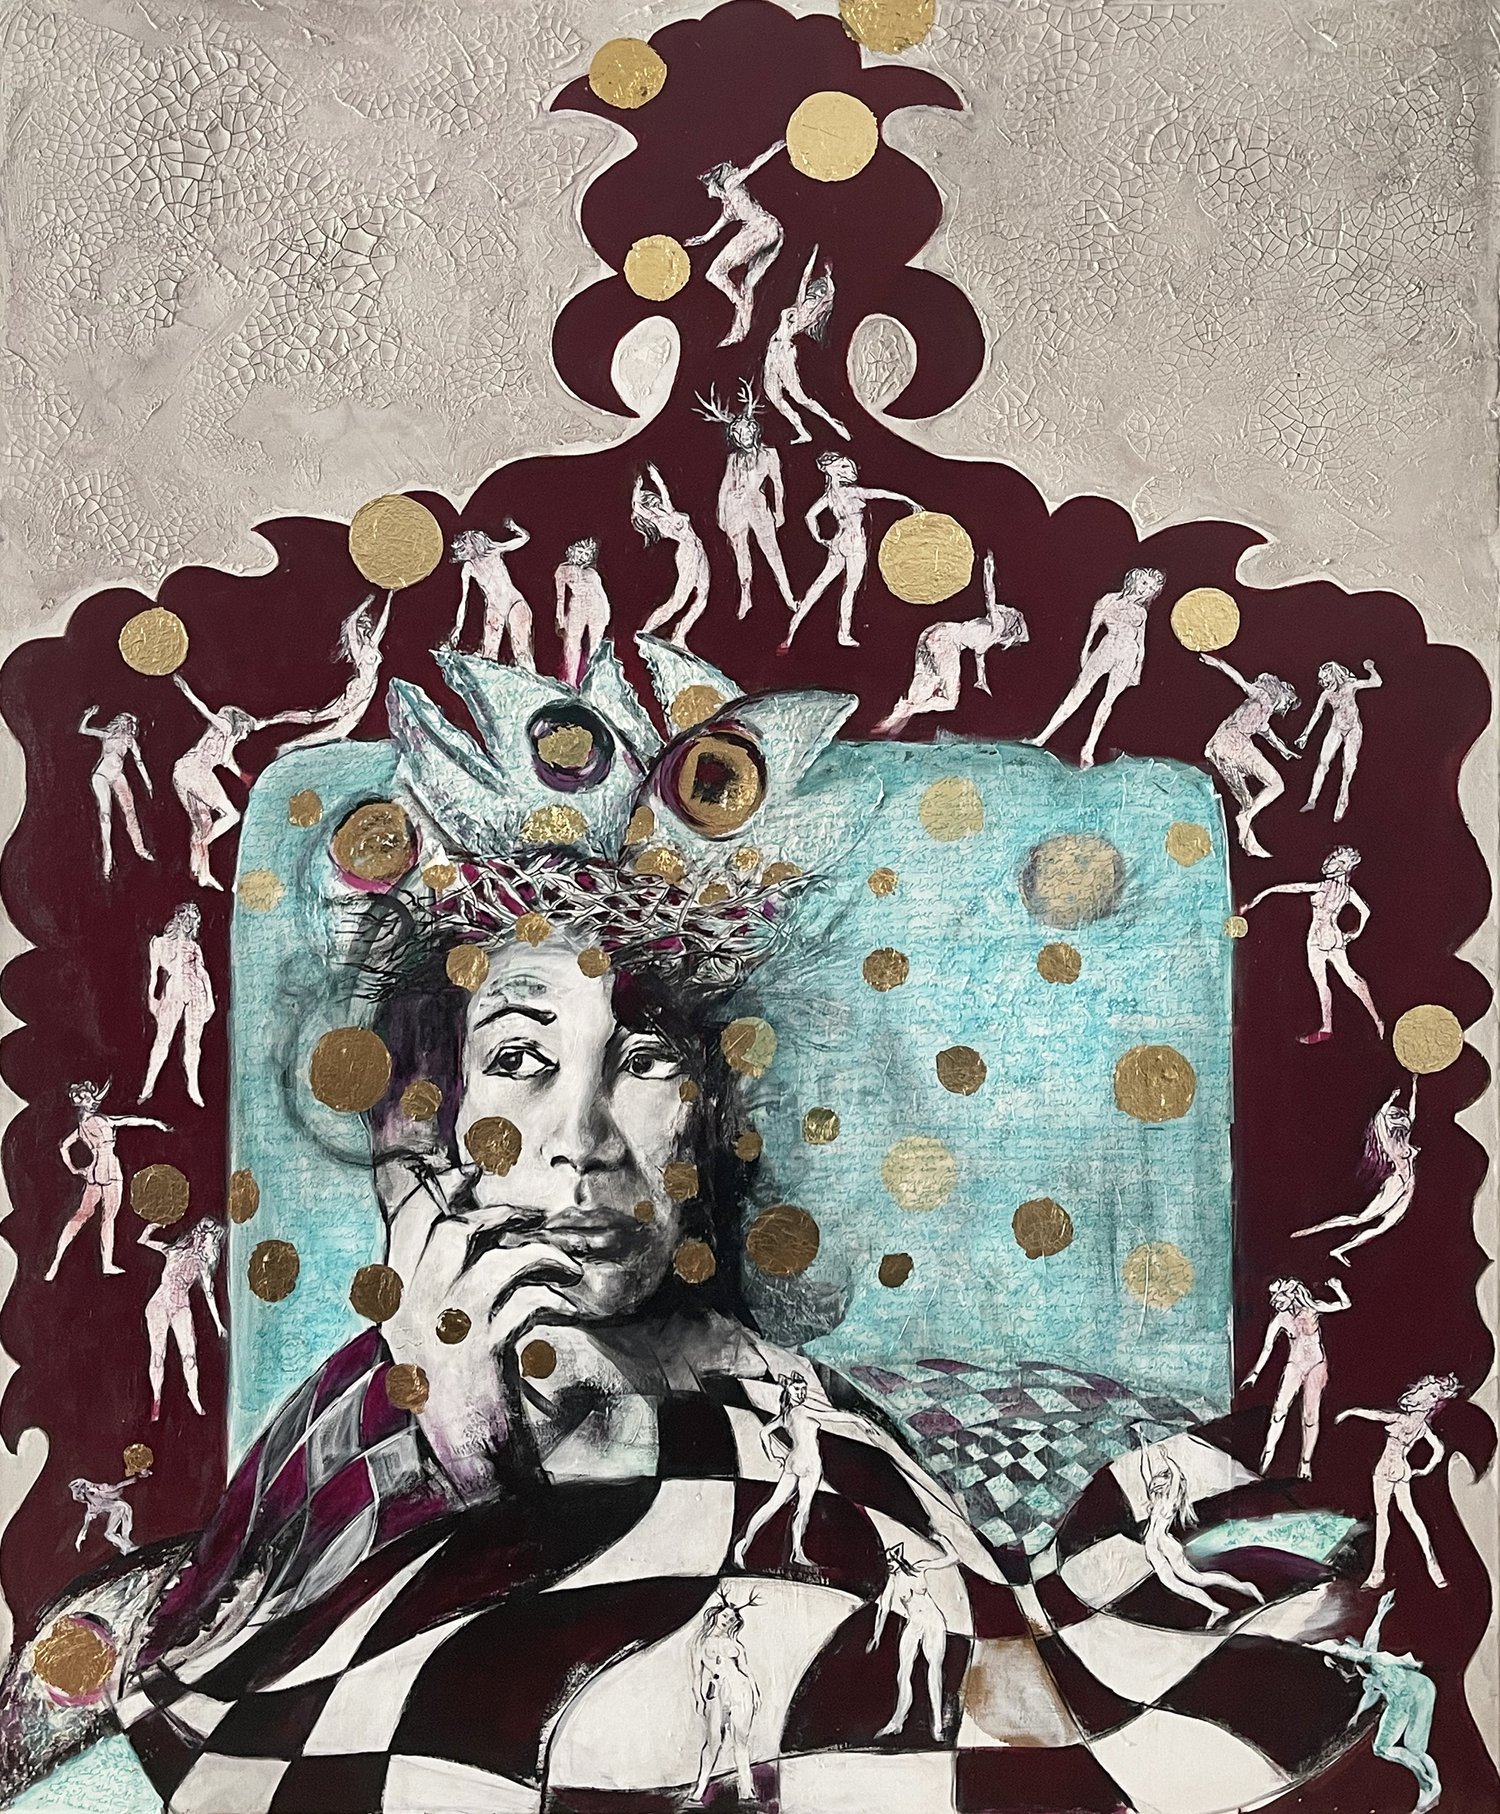   Another Realm by Maryam Rassapour   48”x 60”, Acrylic, calligraphy, gold leaf, charcoal,  My latest project, UNSEEN, focuses on the societal and cultural pressures put on women whether in Iran or the US. UNSEEN will spotlight and express these femi